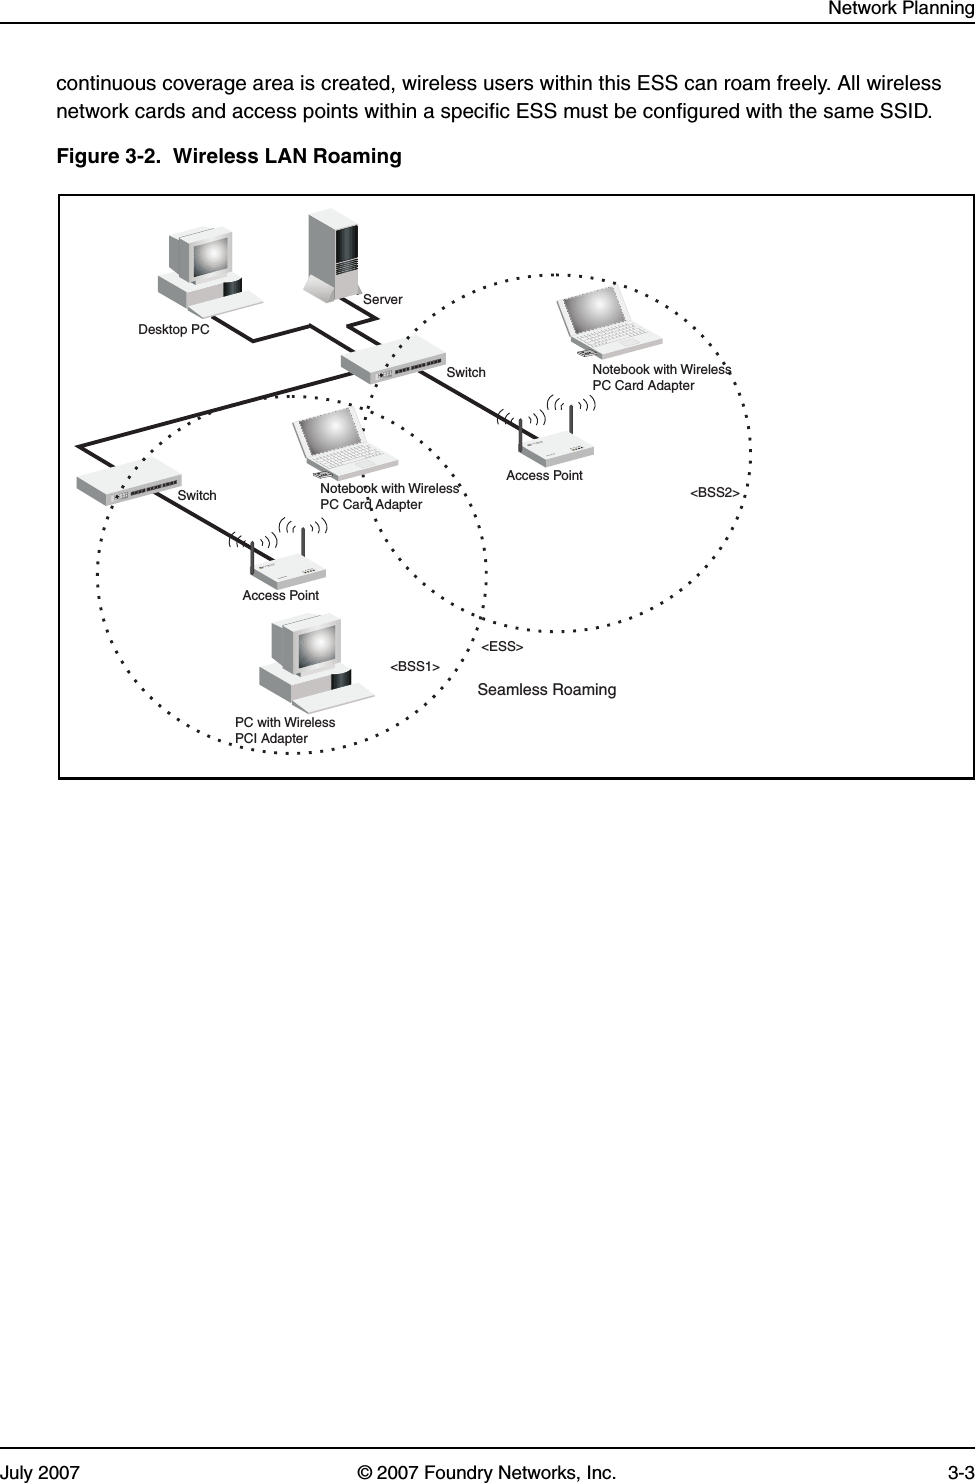 Network PlanningJuly 2007 © 2007 Foundry Networks, Inc. 3-3continuous coverage area is created, wireless users within this ESS can roam freely. All wireless network cards and access points within a specific ESS must be configured with the same SSID.Figure 3-2.  Wireless LAN Roaming&lt;BSS2&gt;Seamless Roaming&lt;ESS&gt;&lt;BSS1&gt;ServerSwitchDesktop PCAccess PointPC with WirelessPCI AdapterNotebook with WirelessPC Card AdapterNotebook with WirelessPC Card AdapterAccess PointSwitch